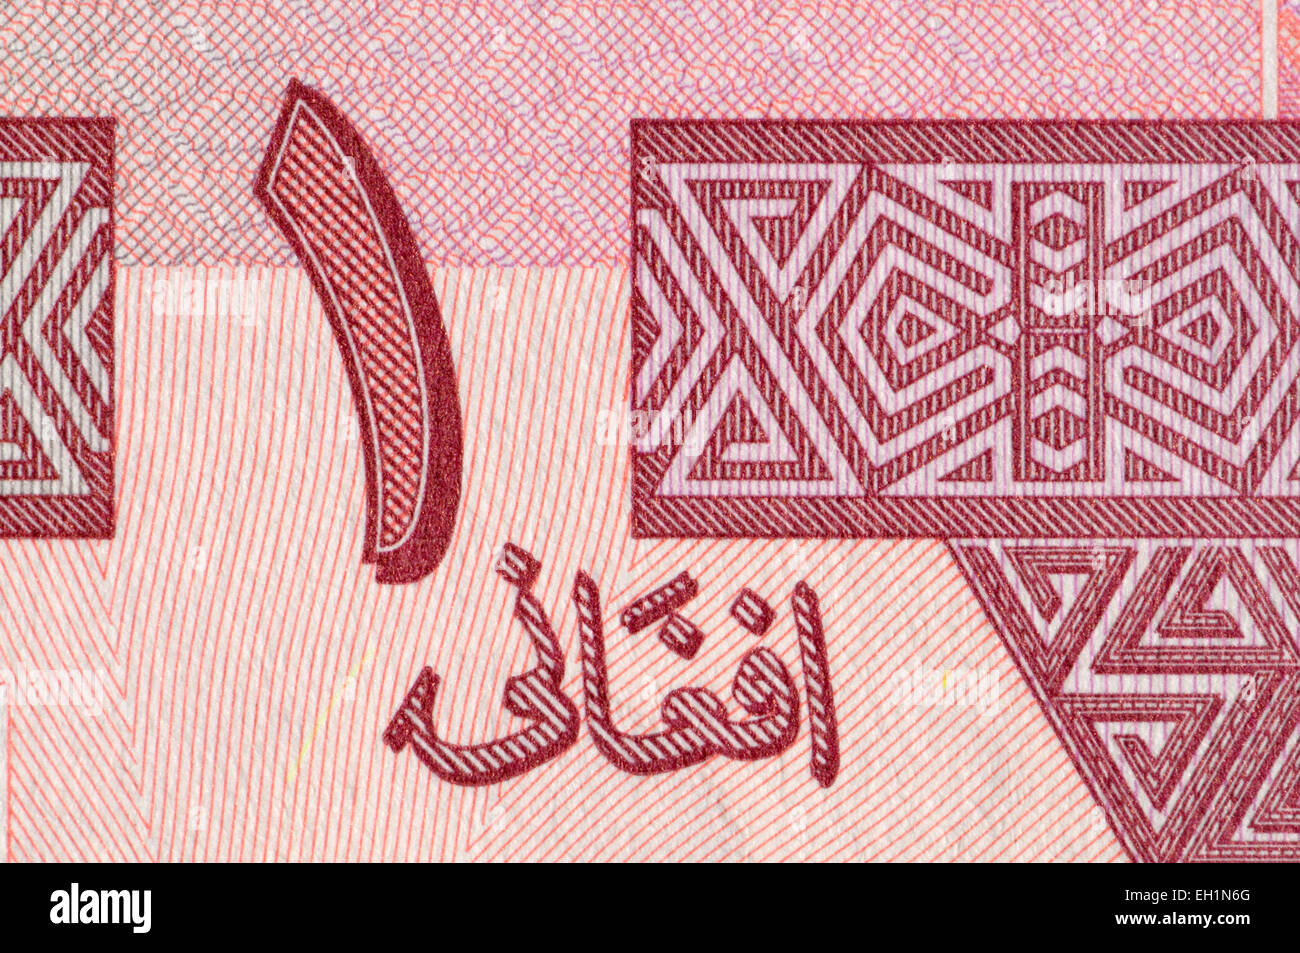 Detail from an Afghan 1 Afghani banknote showing the number 1 in  Eastern Arabic / Arabic–Indic numerals Stock Photo